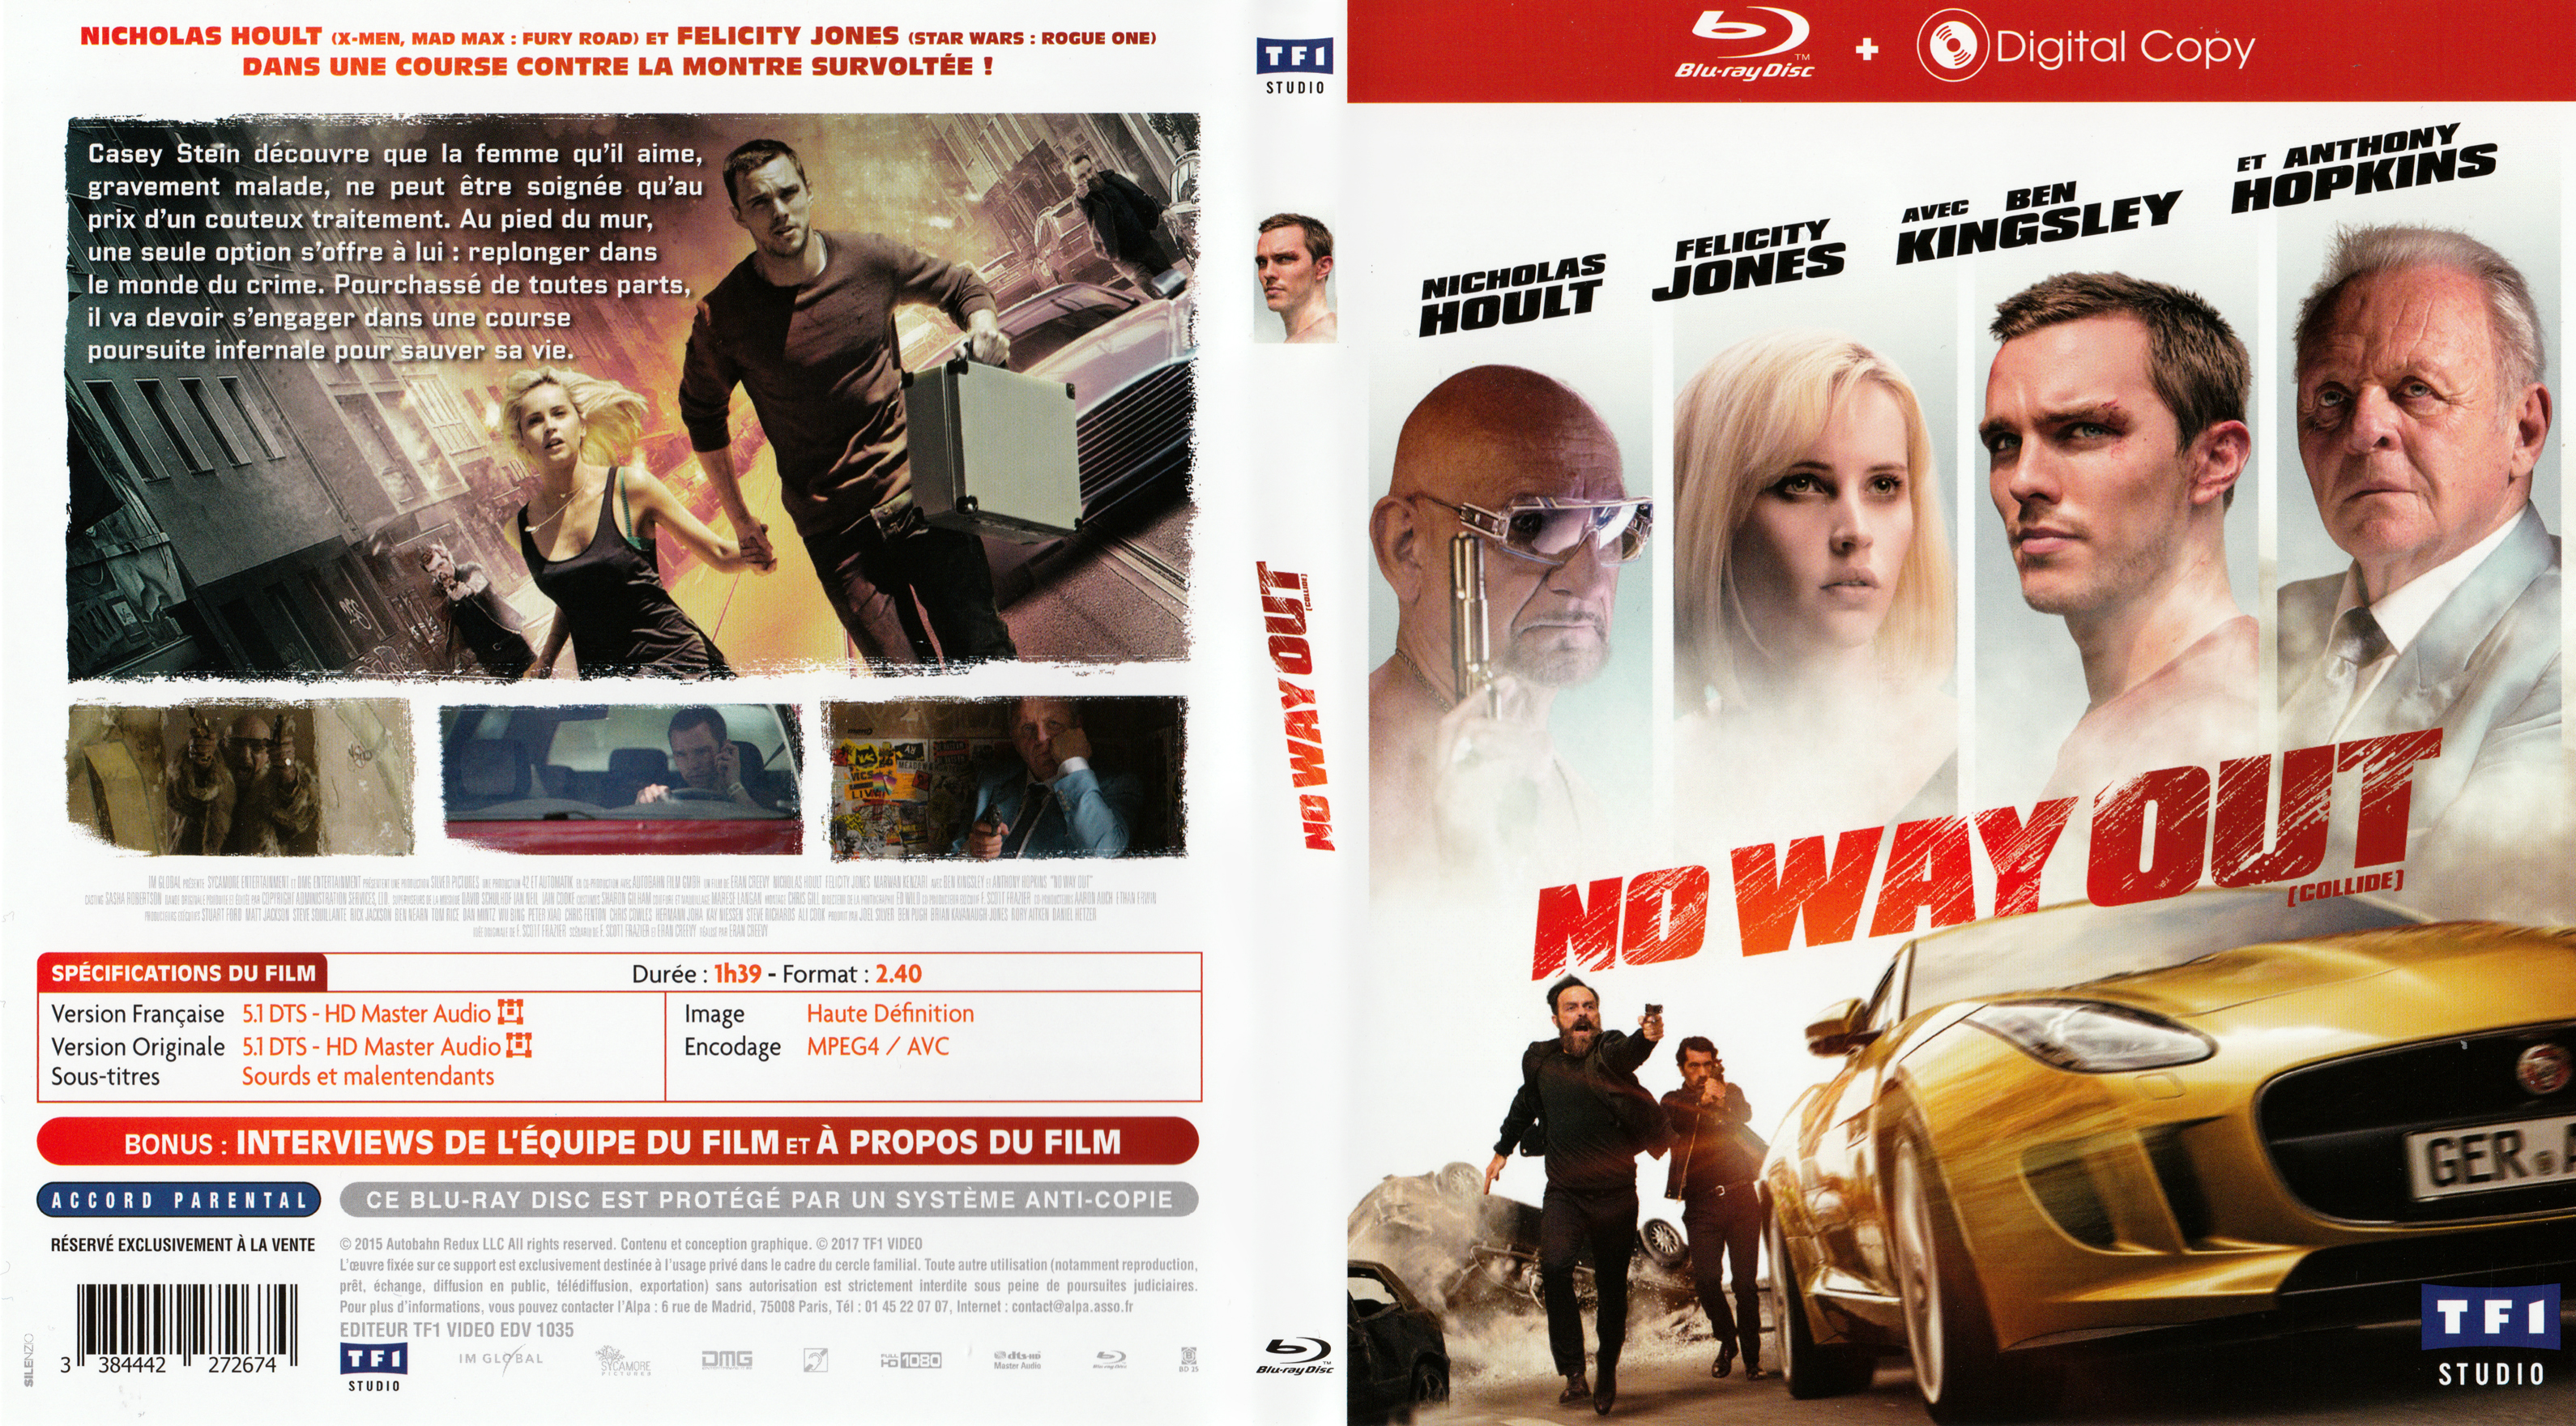 Jaquette DVD No way out (BLU-RAY)